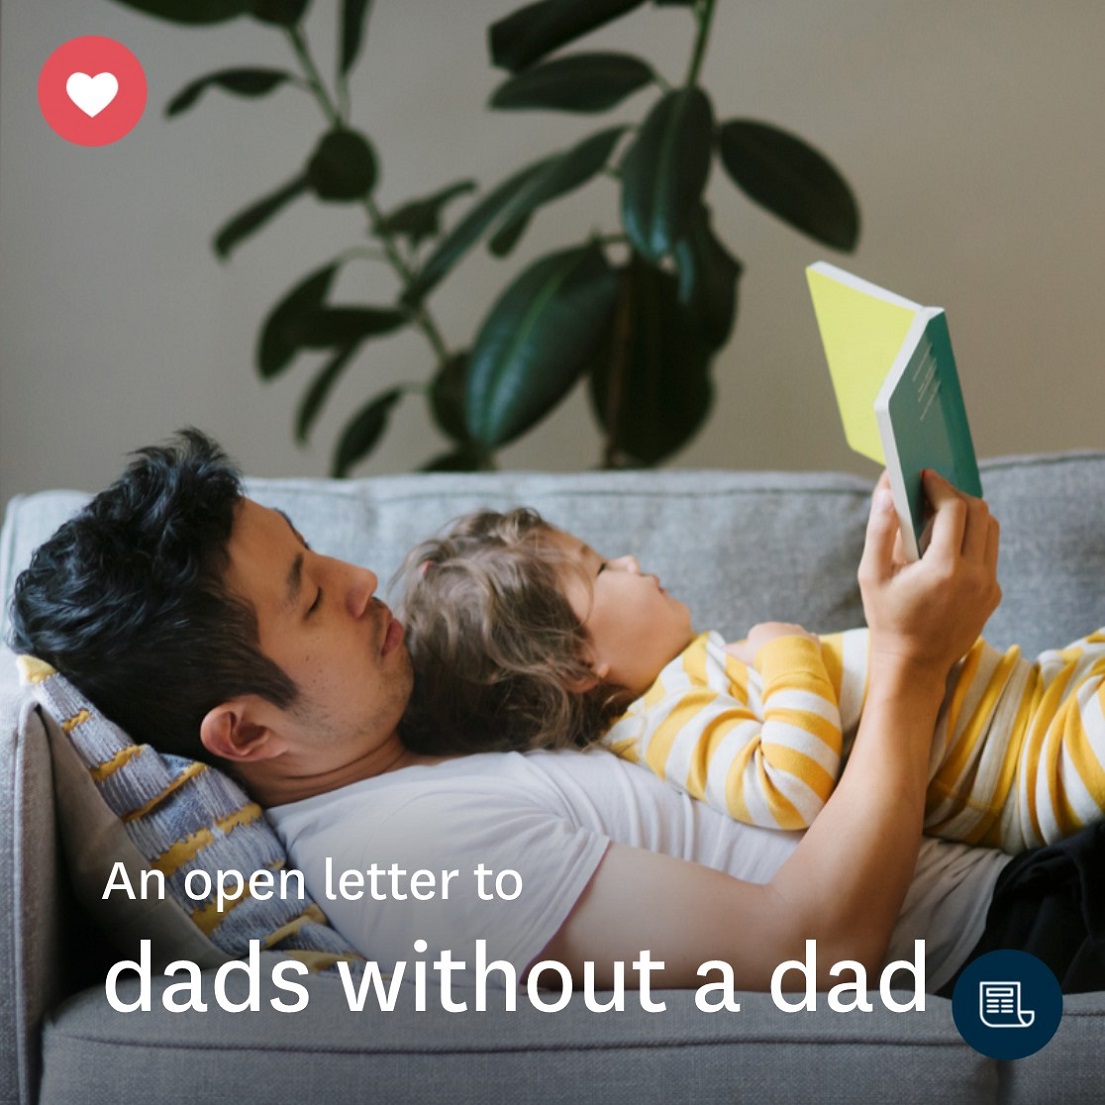 An open letter to those who find Father's Day difficult